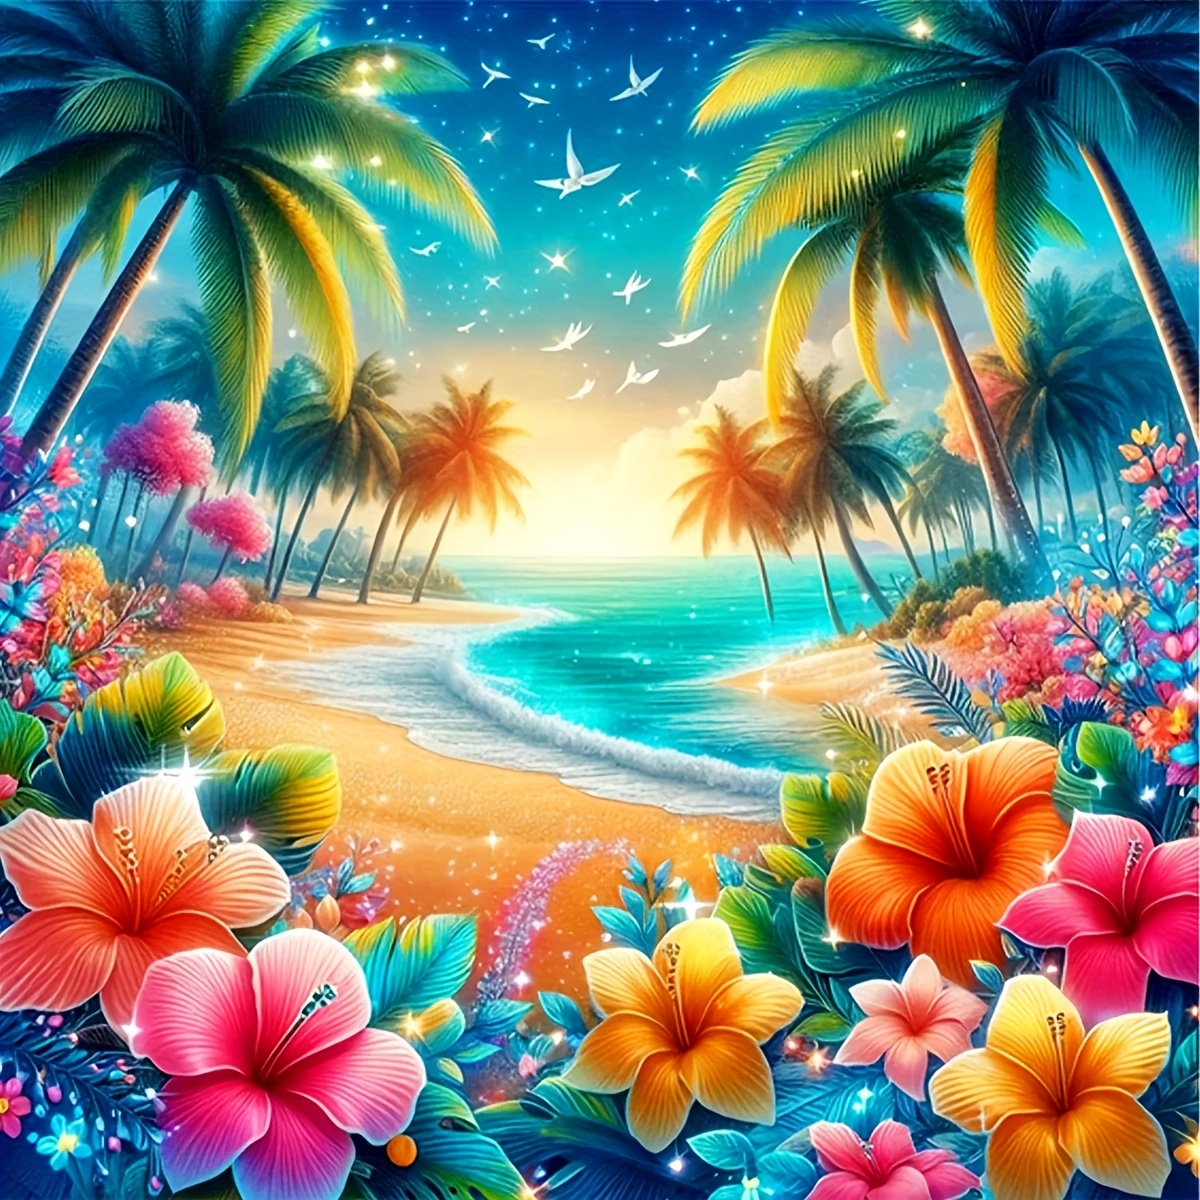 

Round Diamond Painting Kit 1pc - 30x30 Cm 5d Diy Full Drill Acrylic (pmma) Tropical Beach Scene Embroidery Art Craft For Wall Decor And Home Decoration, Frameless Unique Gift